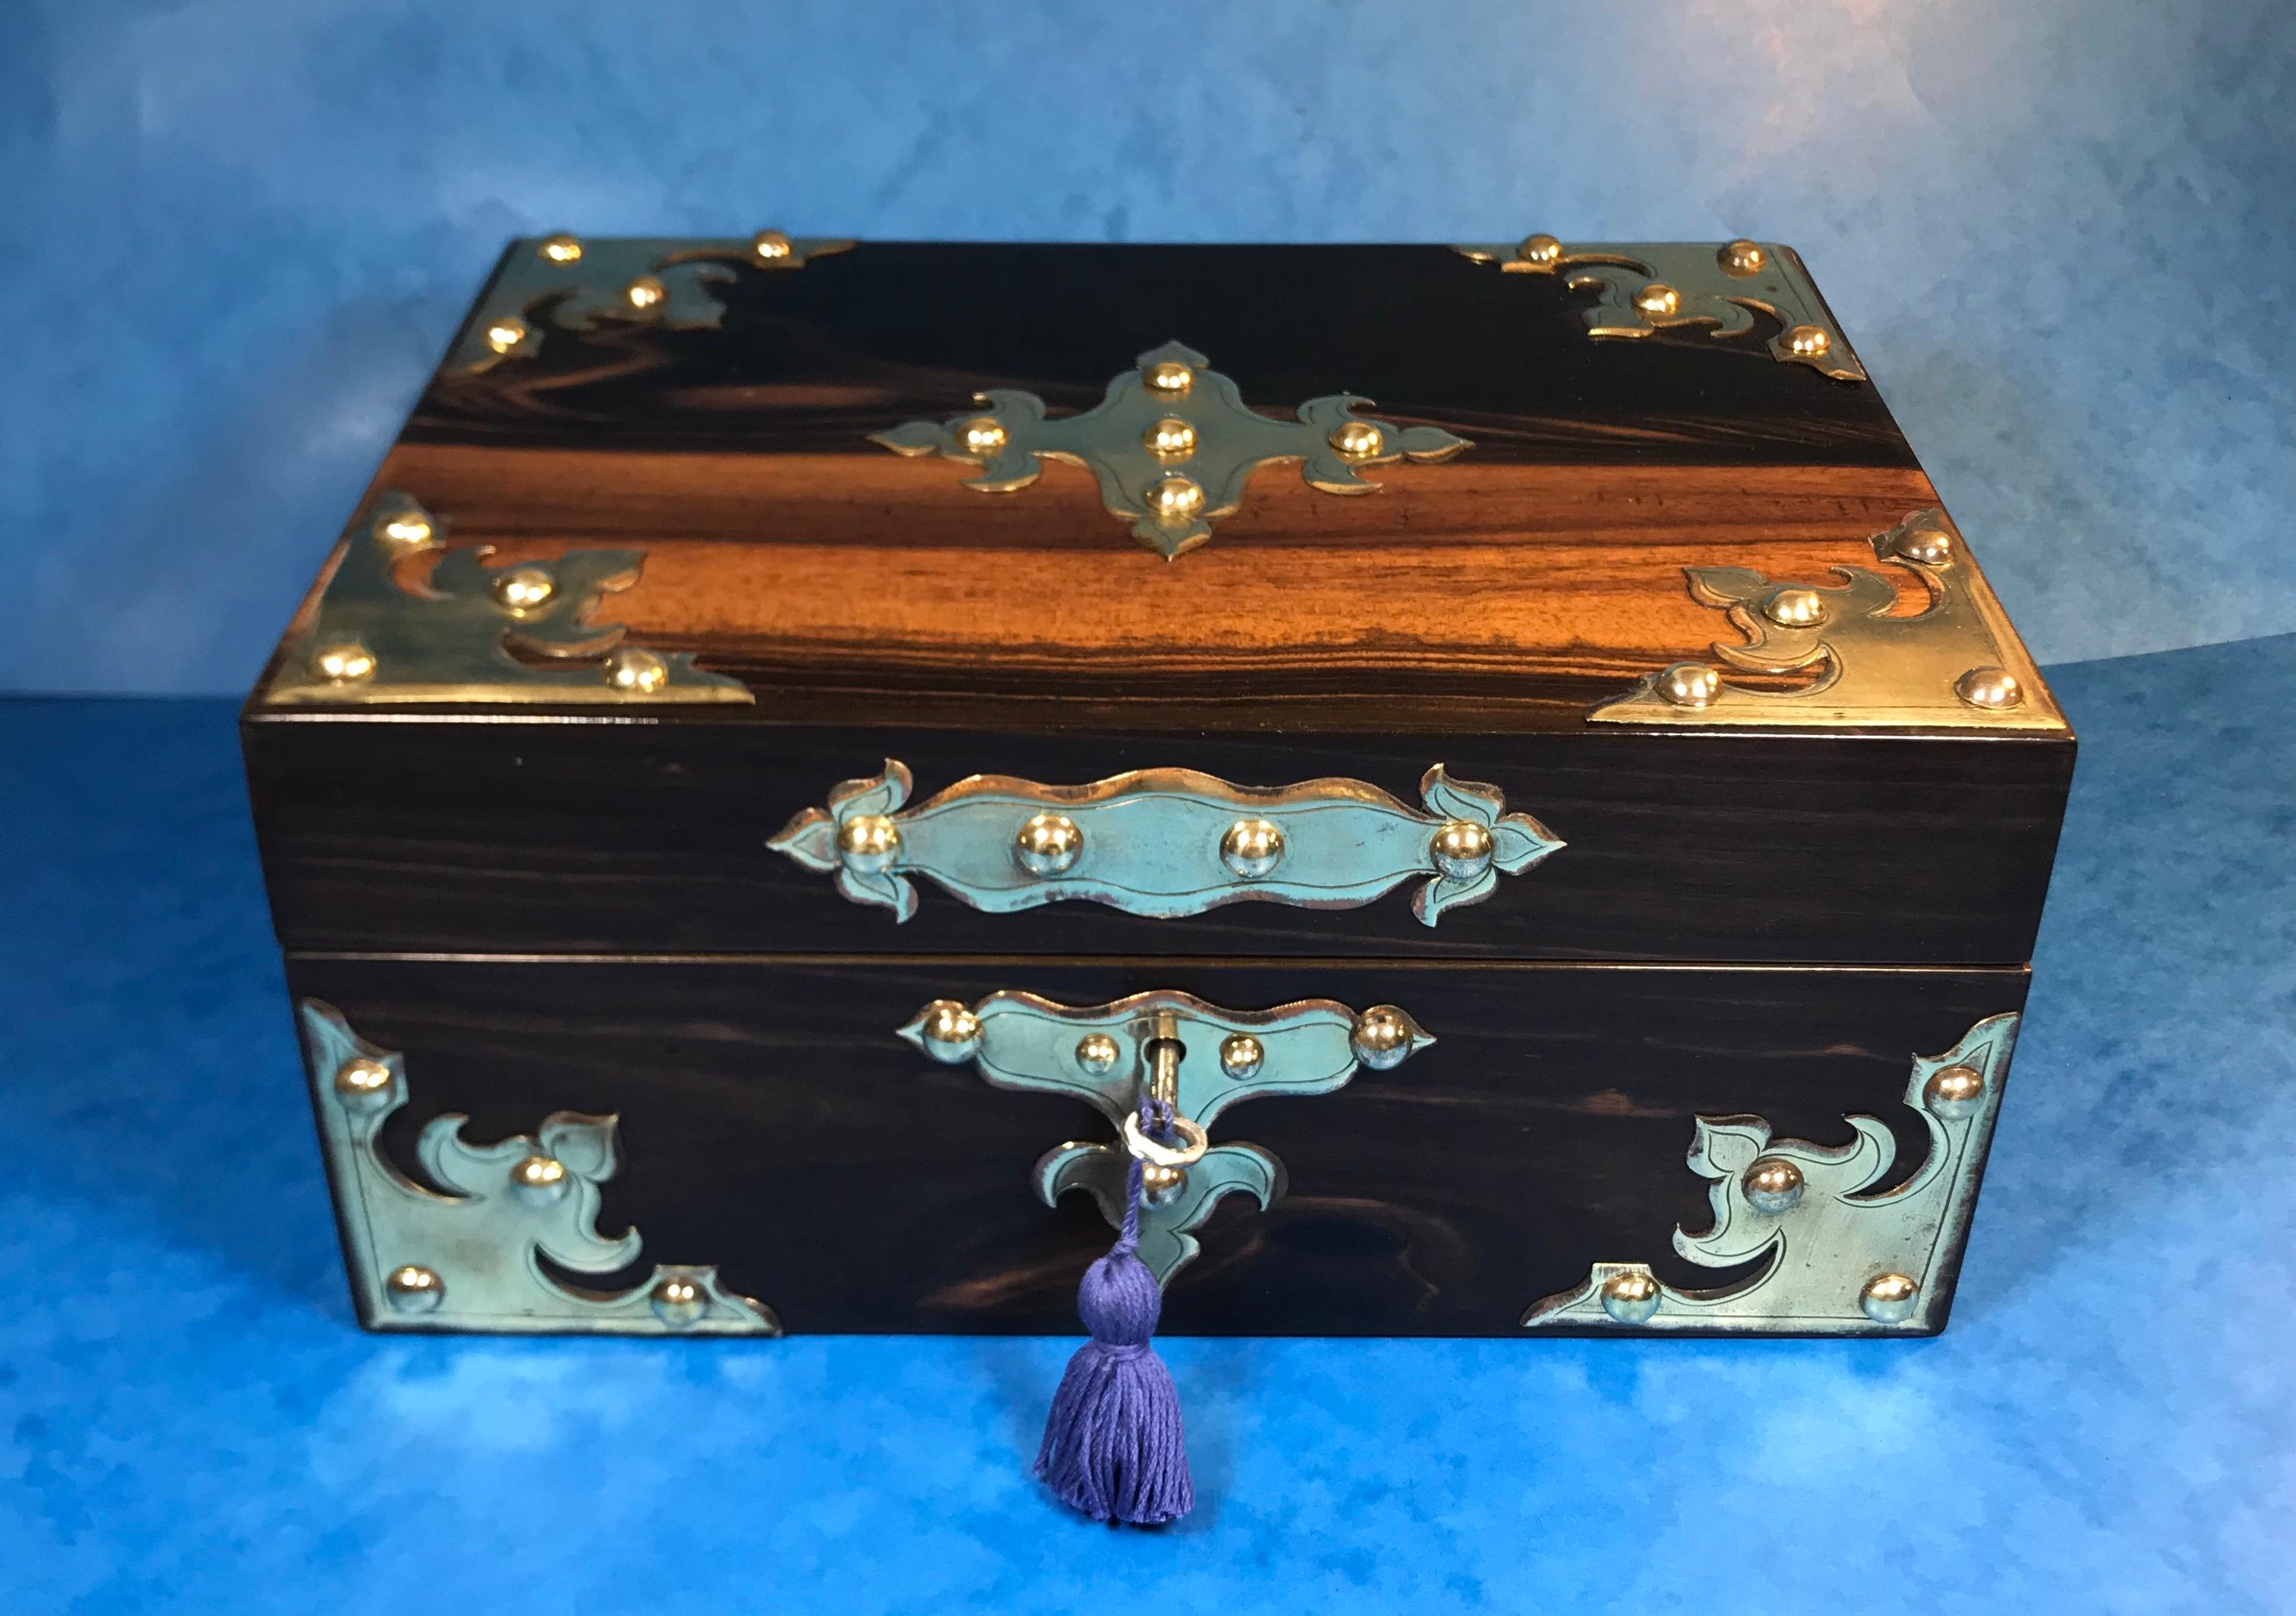 Victorian Coromandel jewellery box.
A striking brassbound Coromandel jewellery box with Coromandel top and front and fruitwood sides and back, dating back to circa 1860, featuring a working lock and key. The box houses its original tray, the